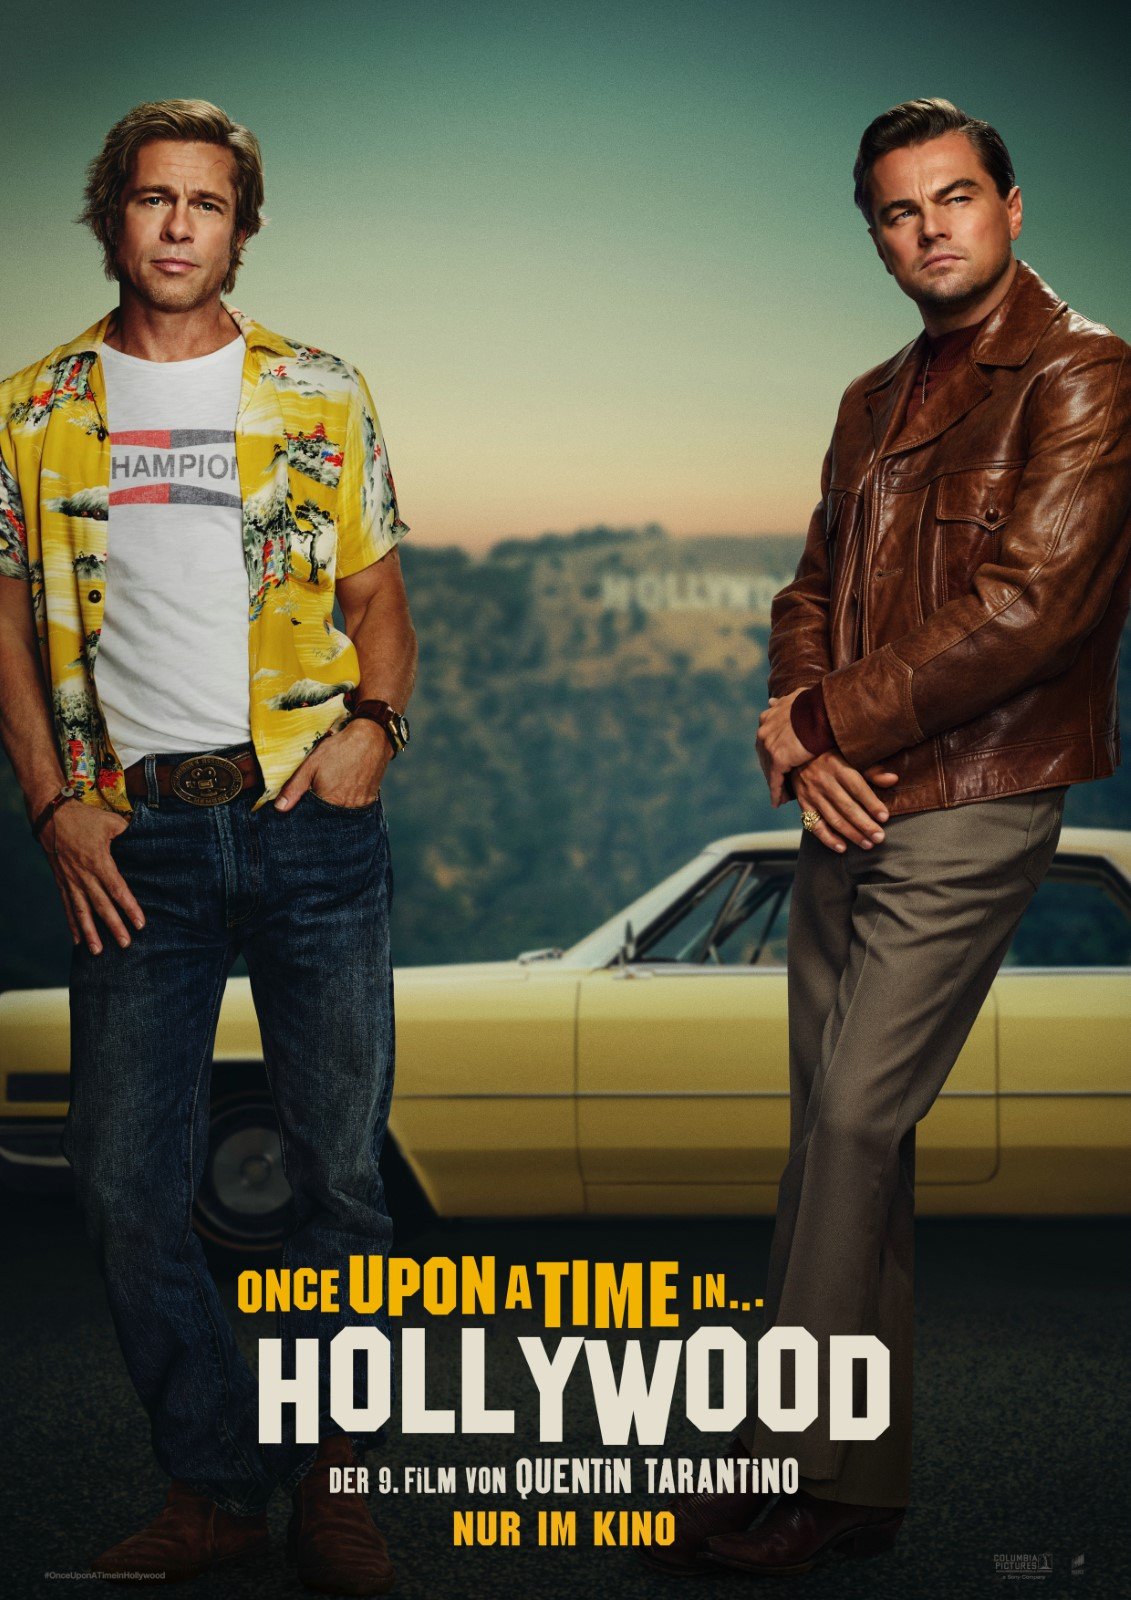 Once Upon A Time In... Hollywood - Film 2019 - FILMSTARTS.de1131 x 1600